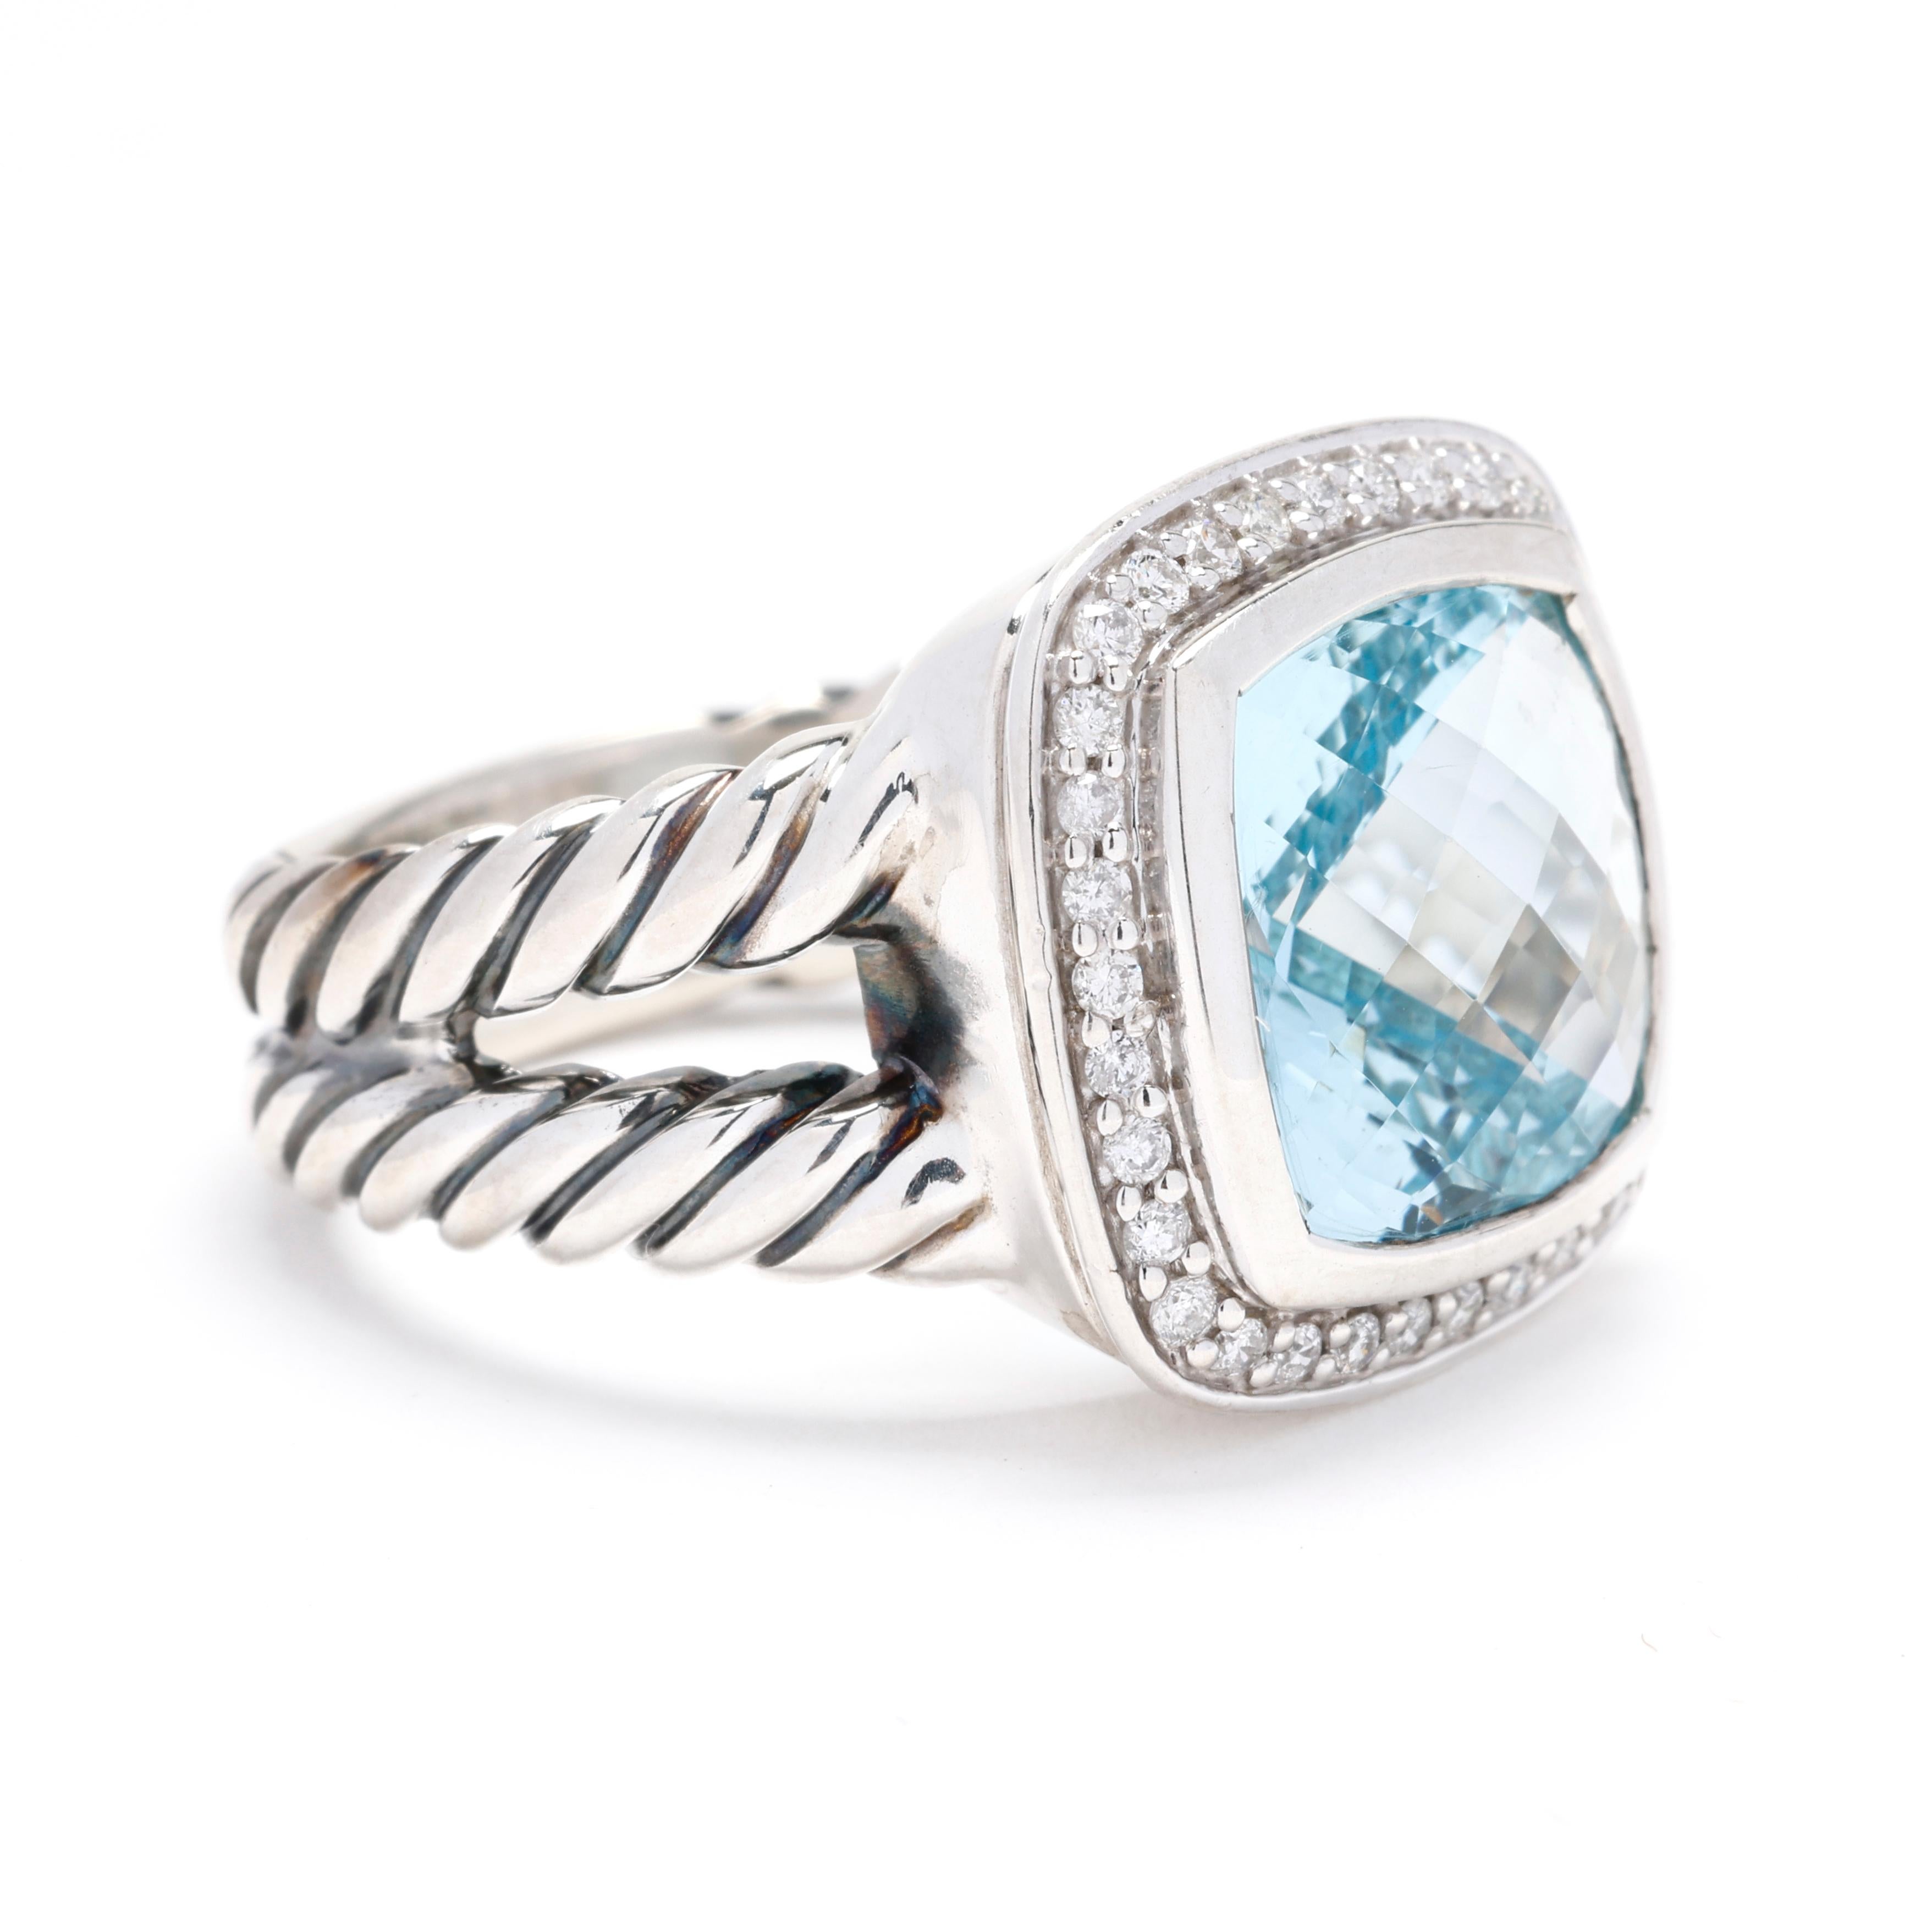 Experience the unparalleled elegance of this David Yurman 6.17ctw Blue Topaz and Diamond Ring. Meticulously crafted in high-quality sterling silver, this exquisite ring features a breathtaking blue topaz center stone accented by sparkling diamonds,